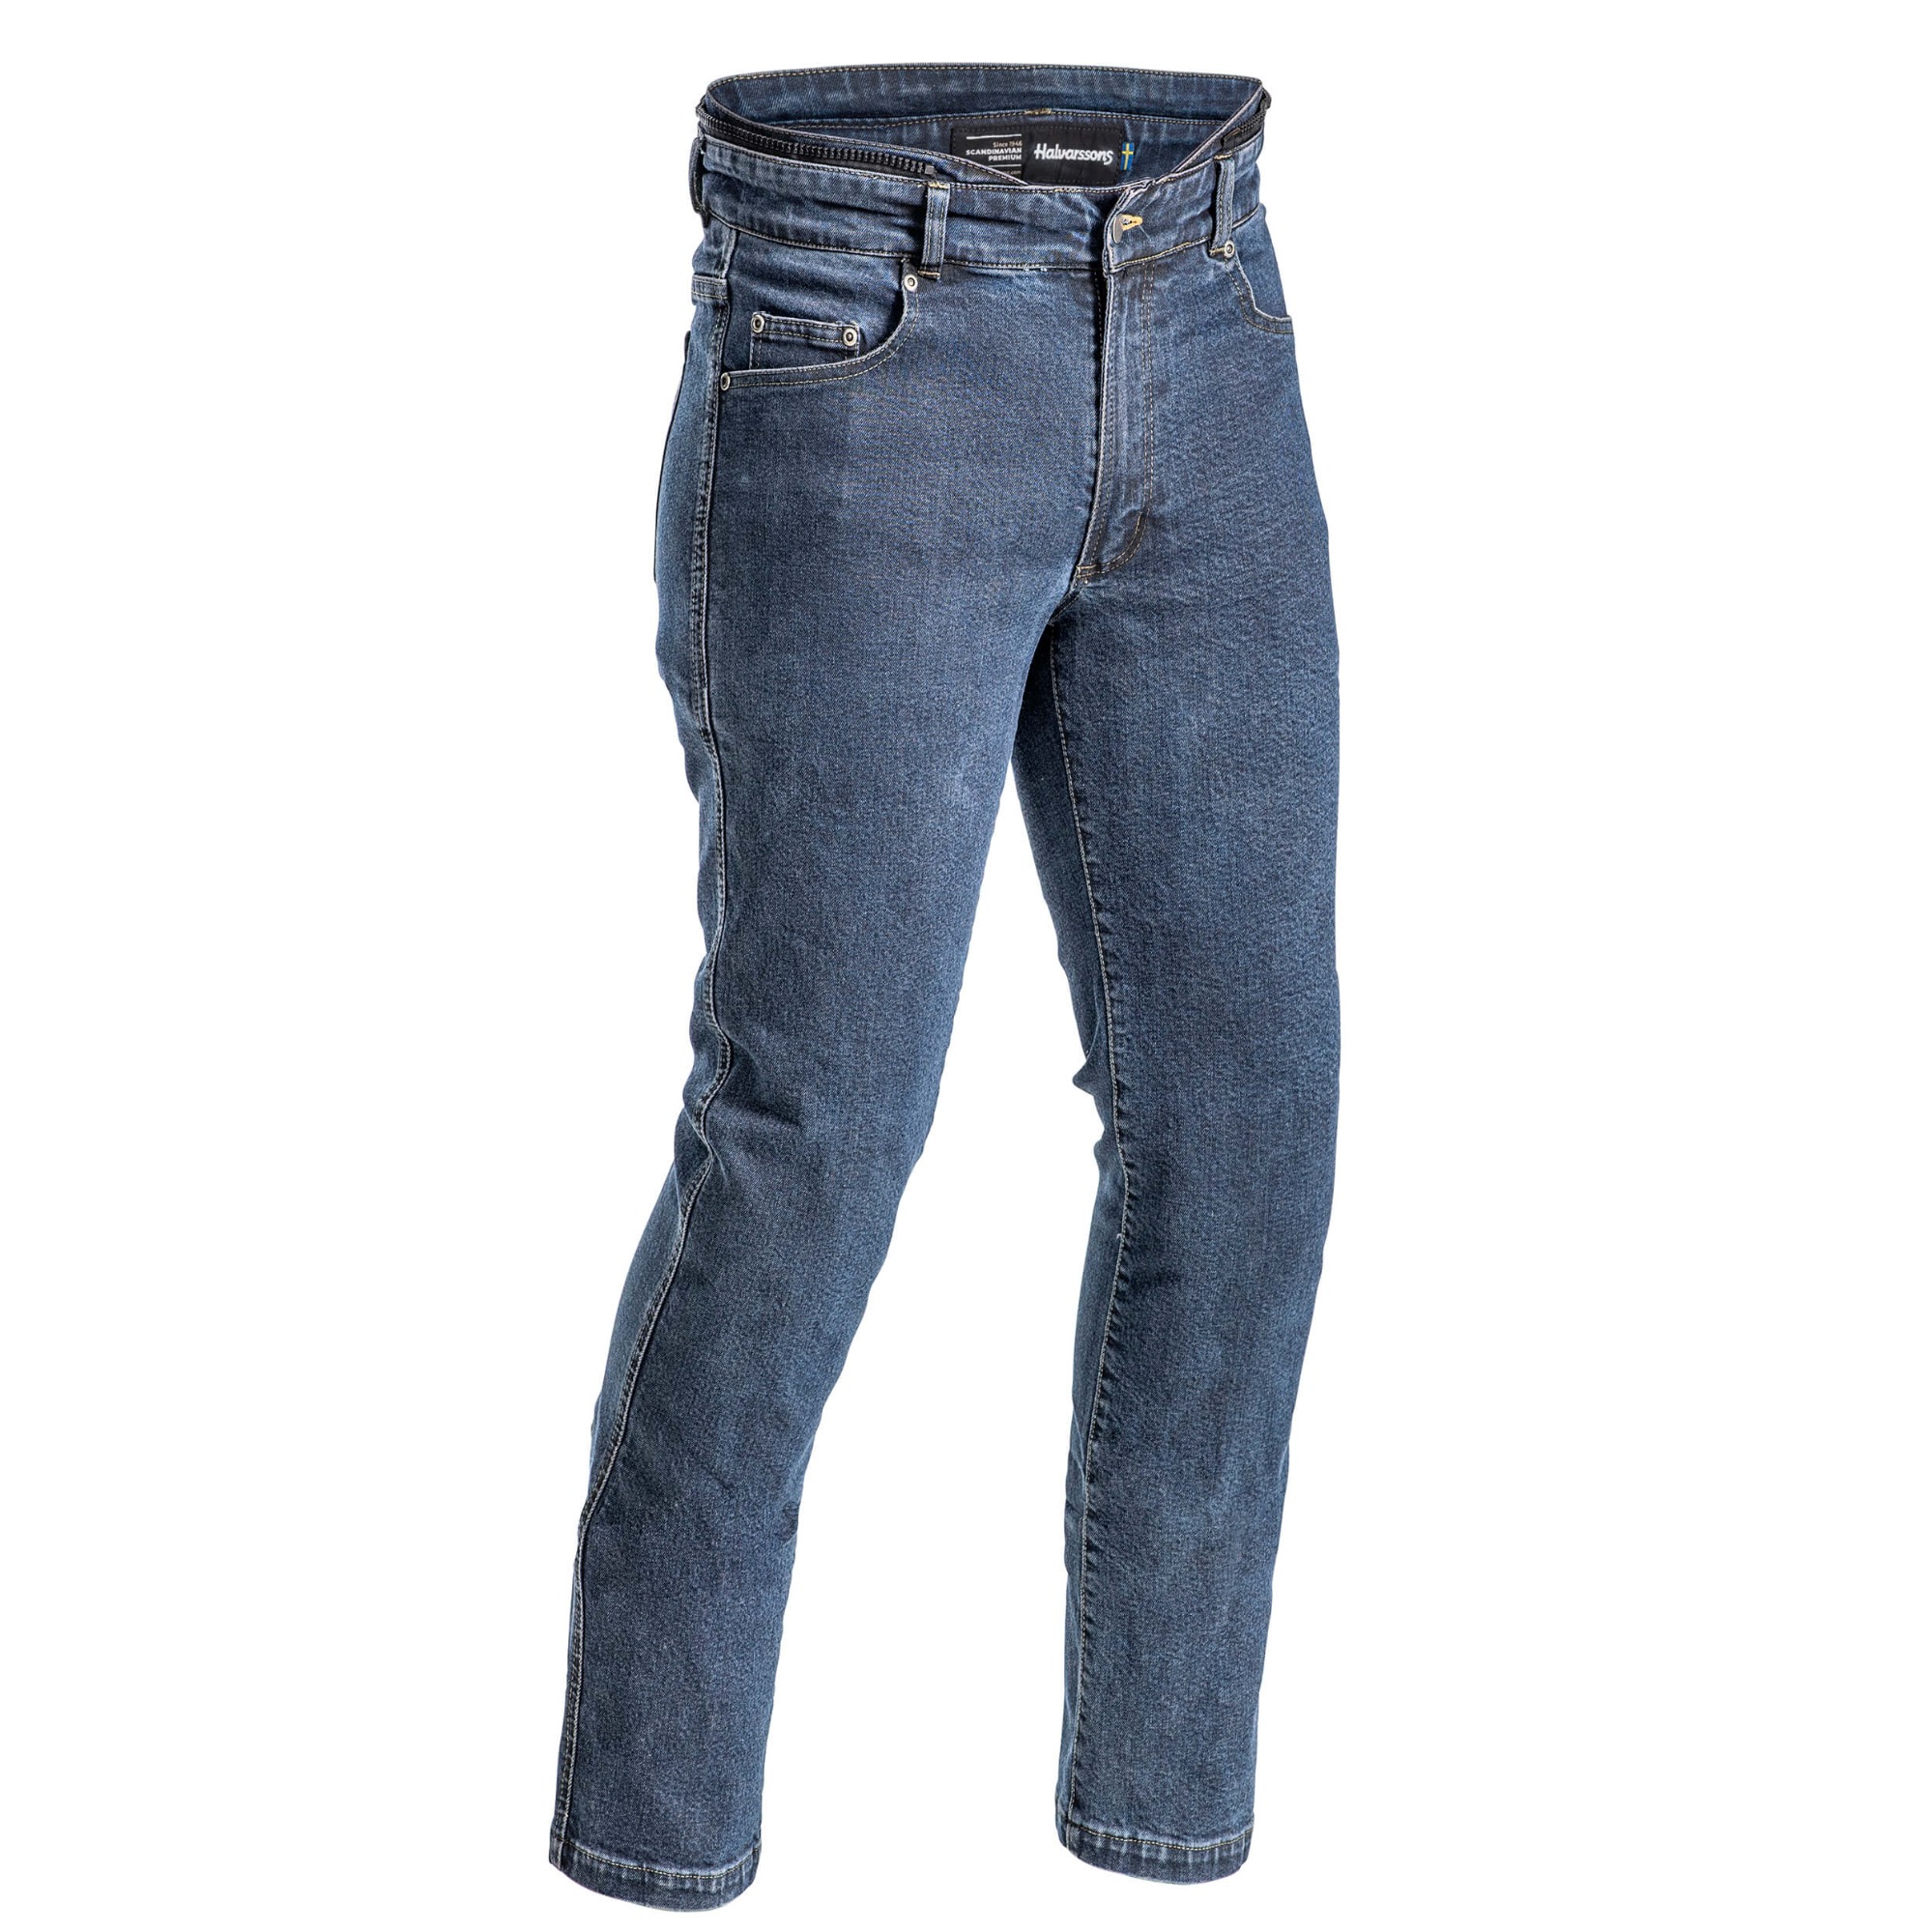 Image of Halvarssons Jeans Rogen Blue Size 54 ID 6438235238983